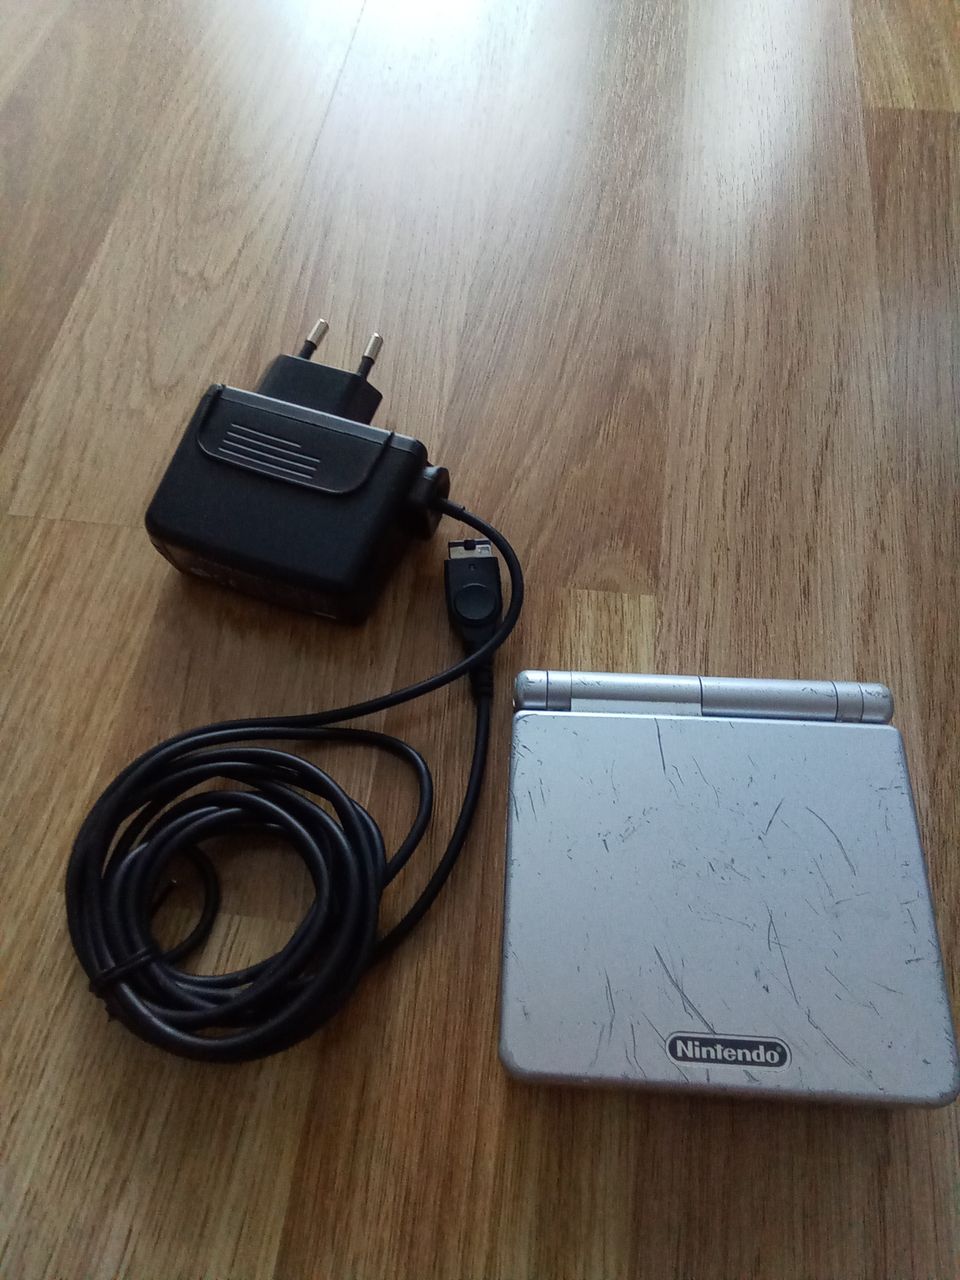 Game boy advance SP ags 001